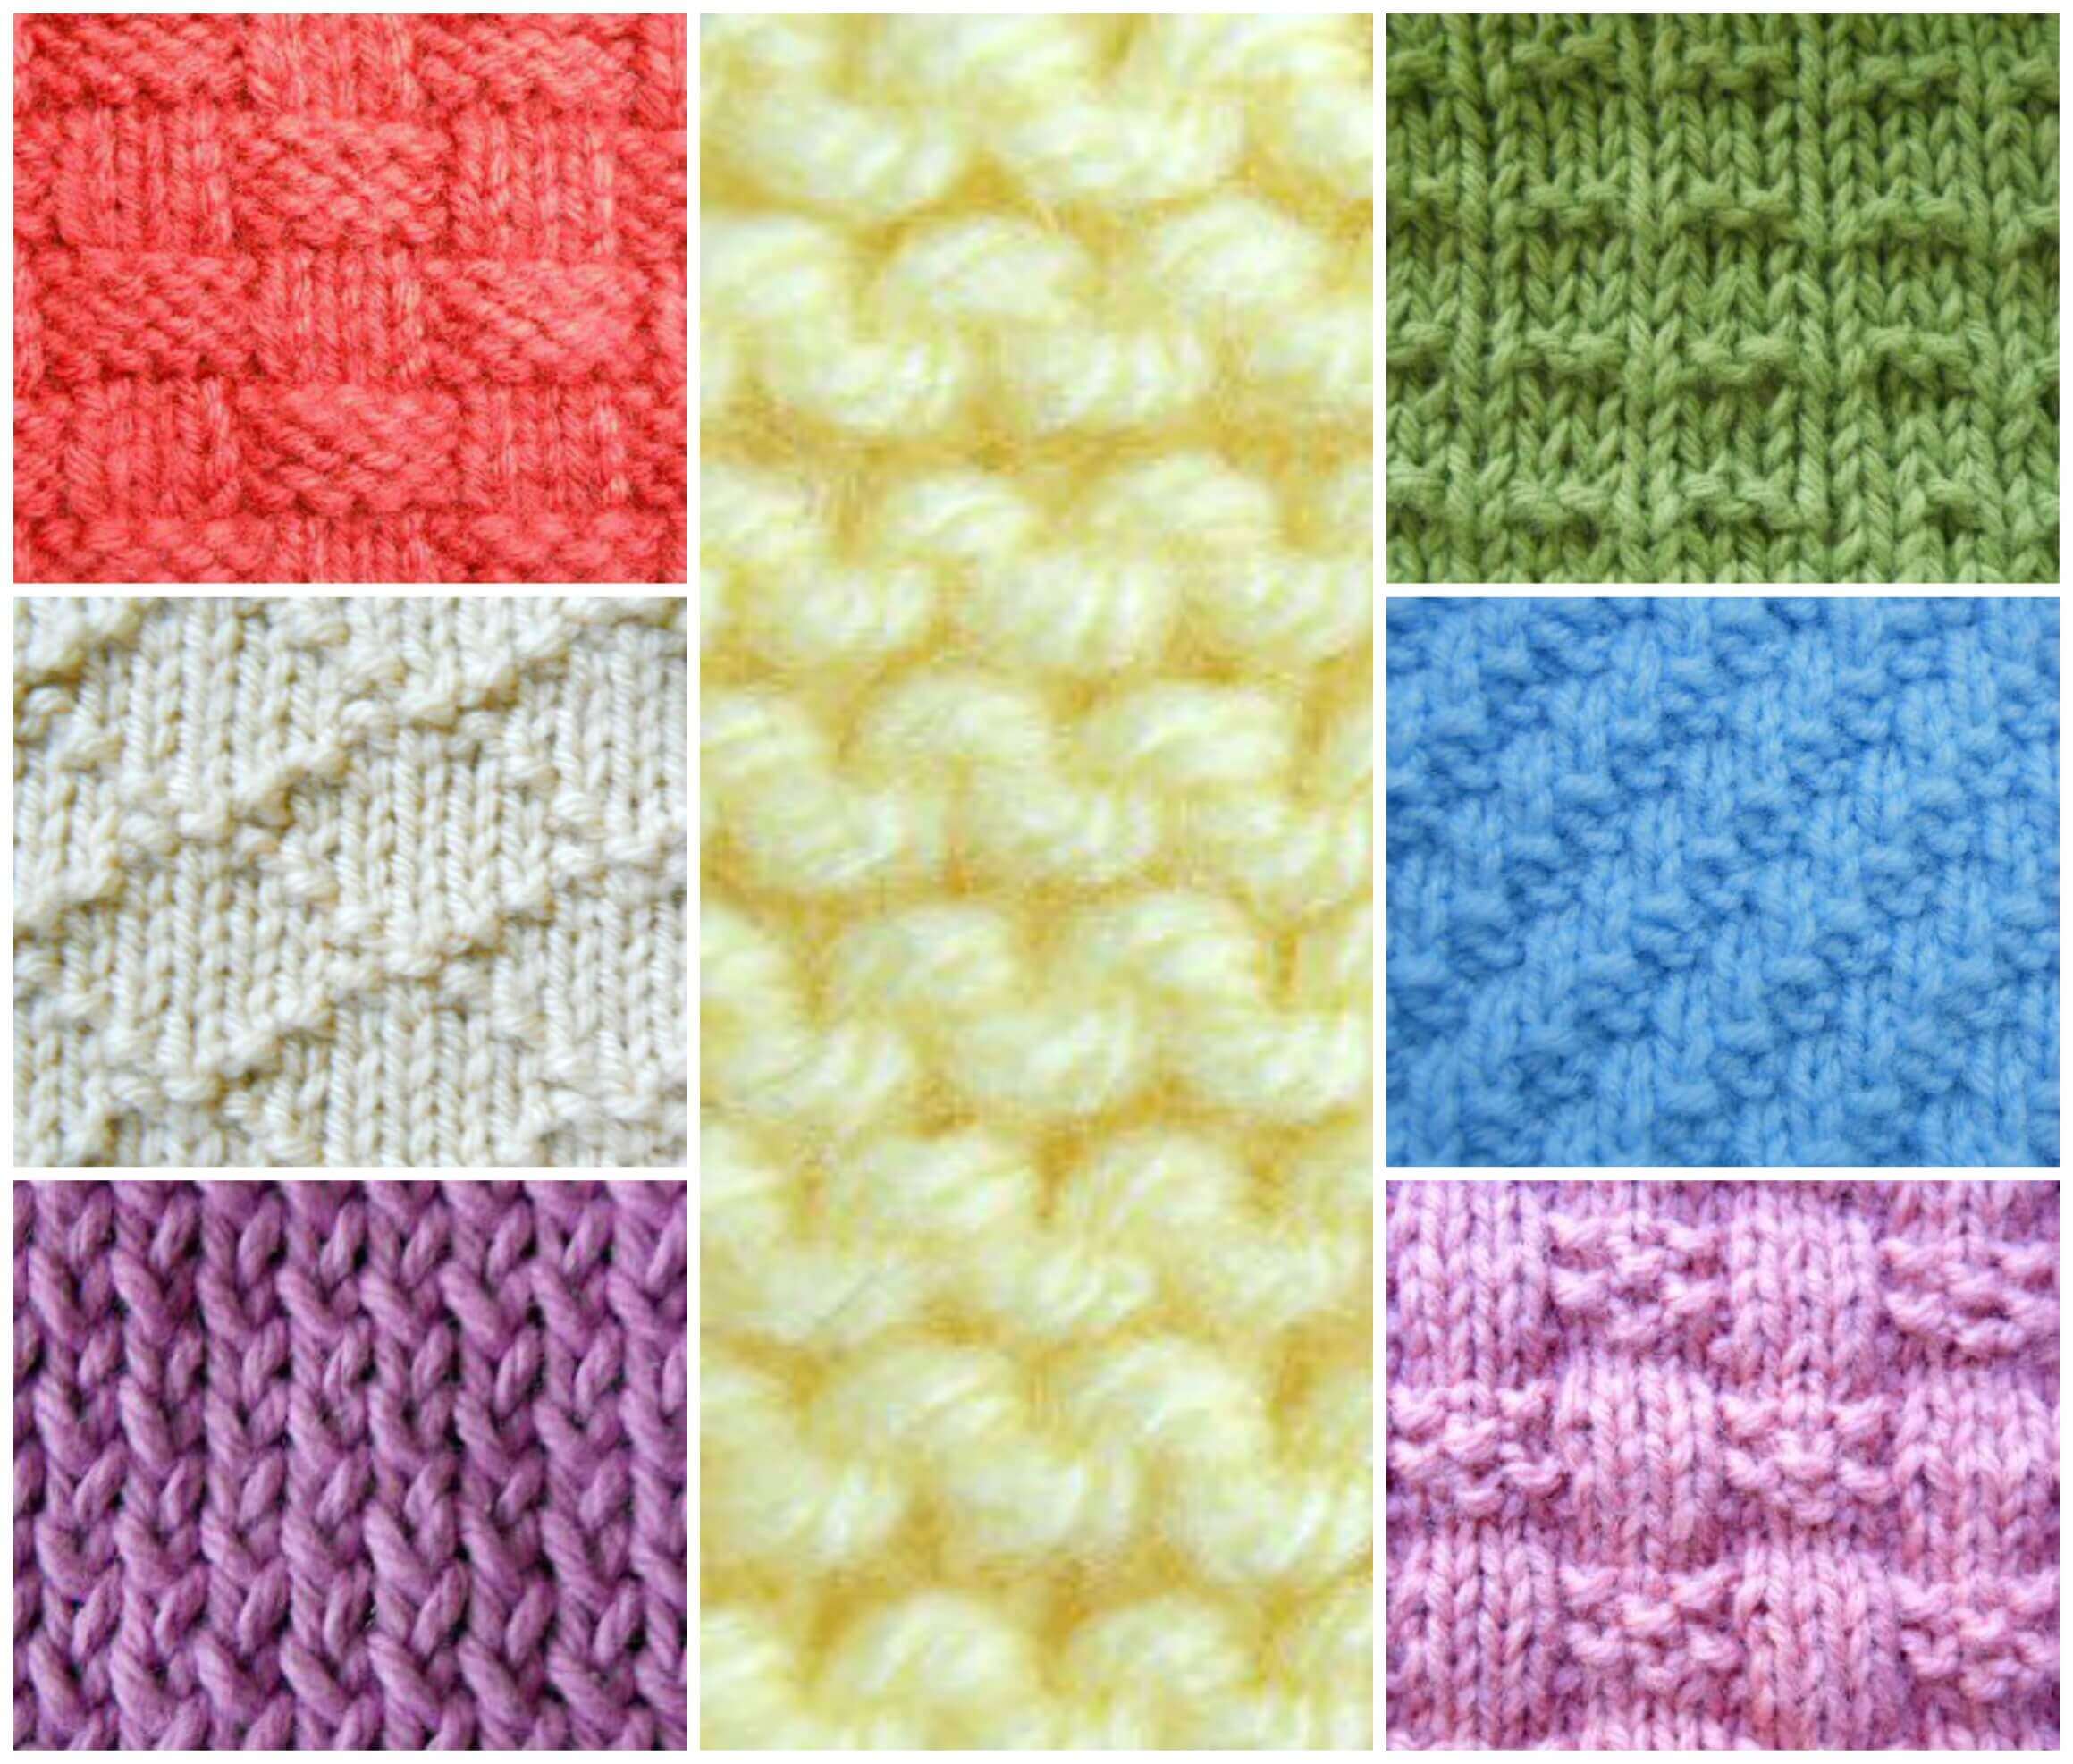 Helpful Tools For Keeping Your Place in Knitting Charts